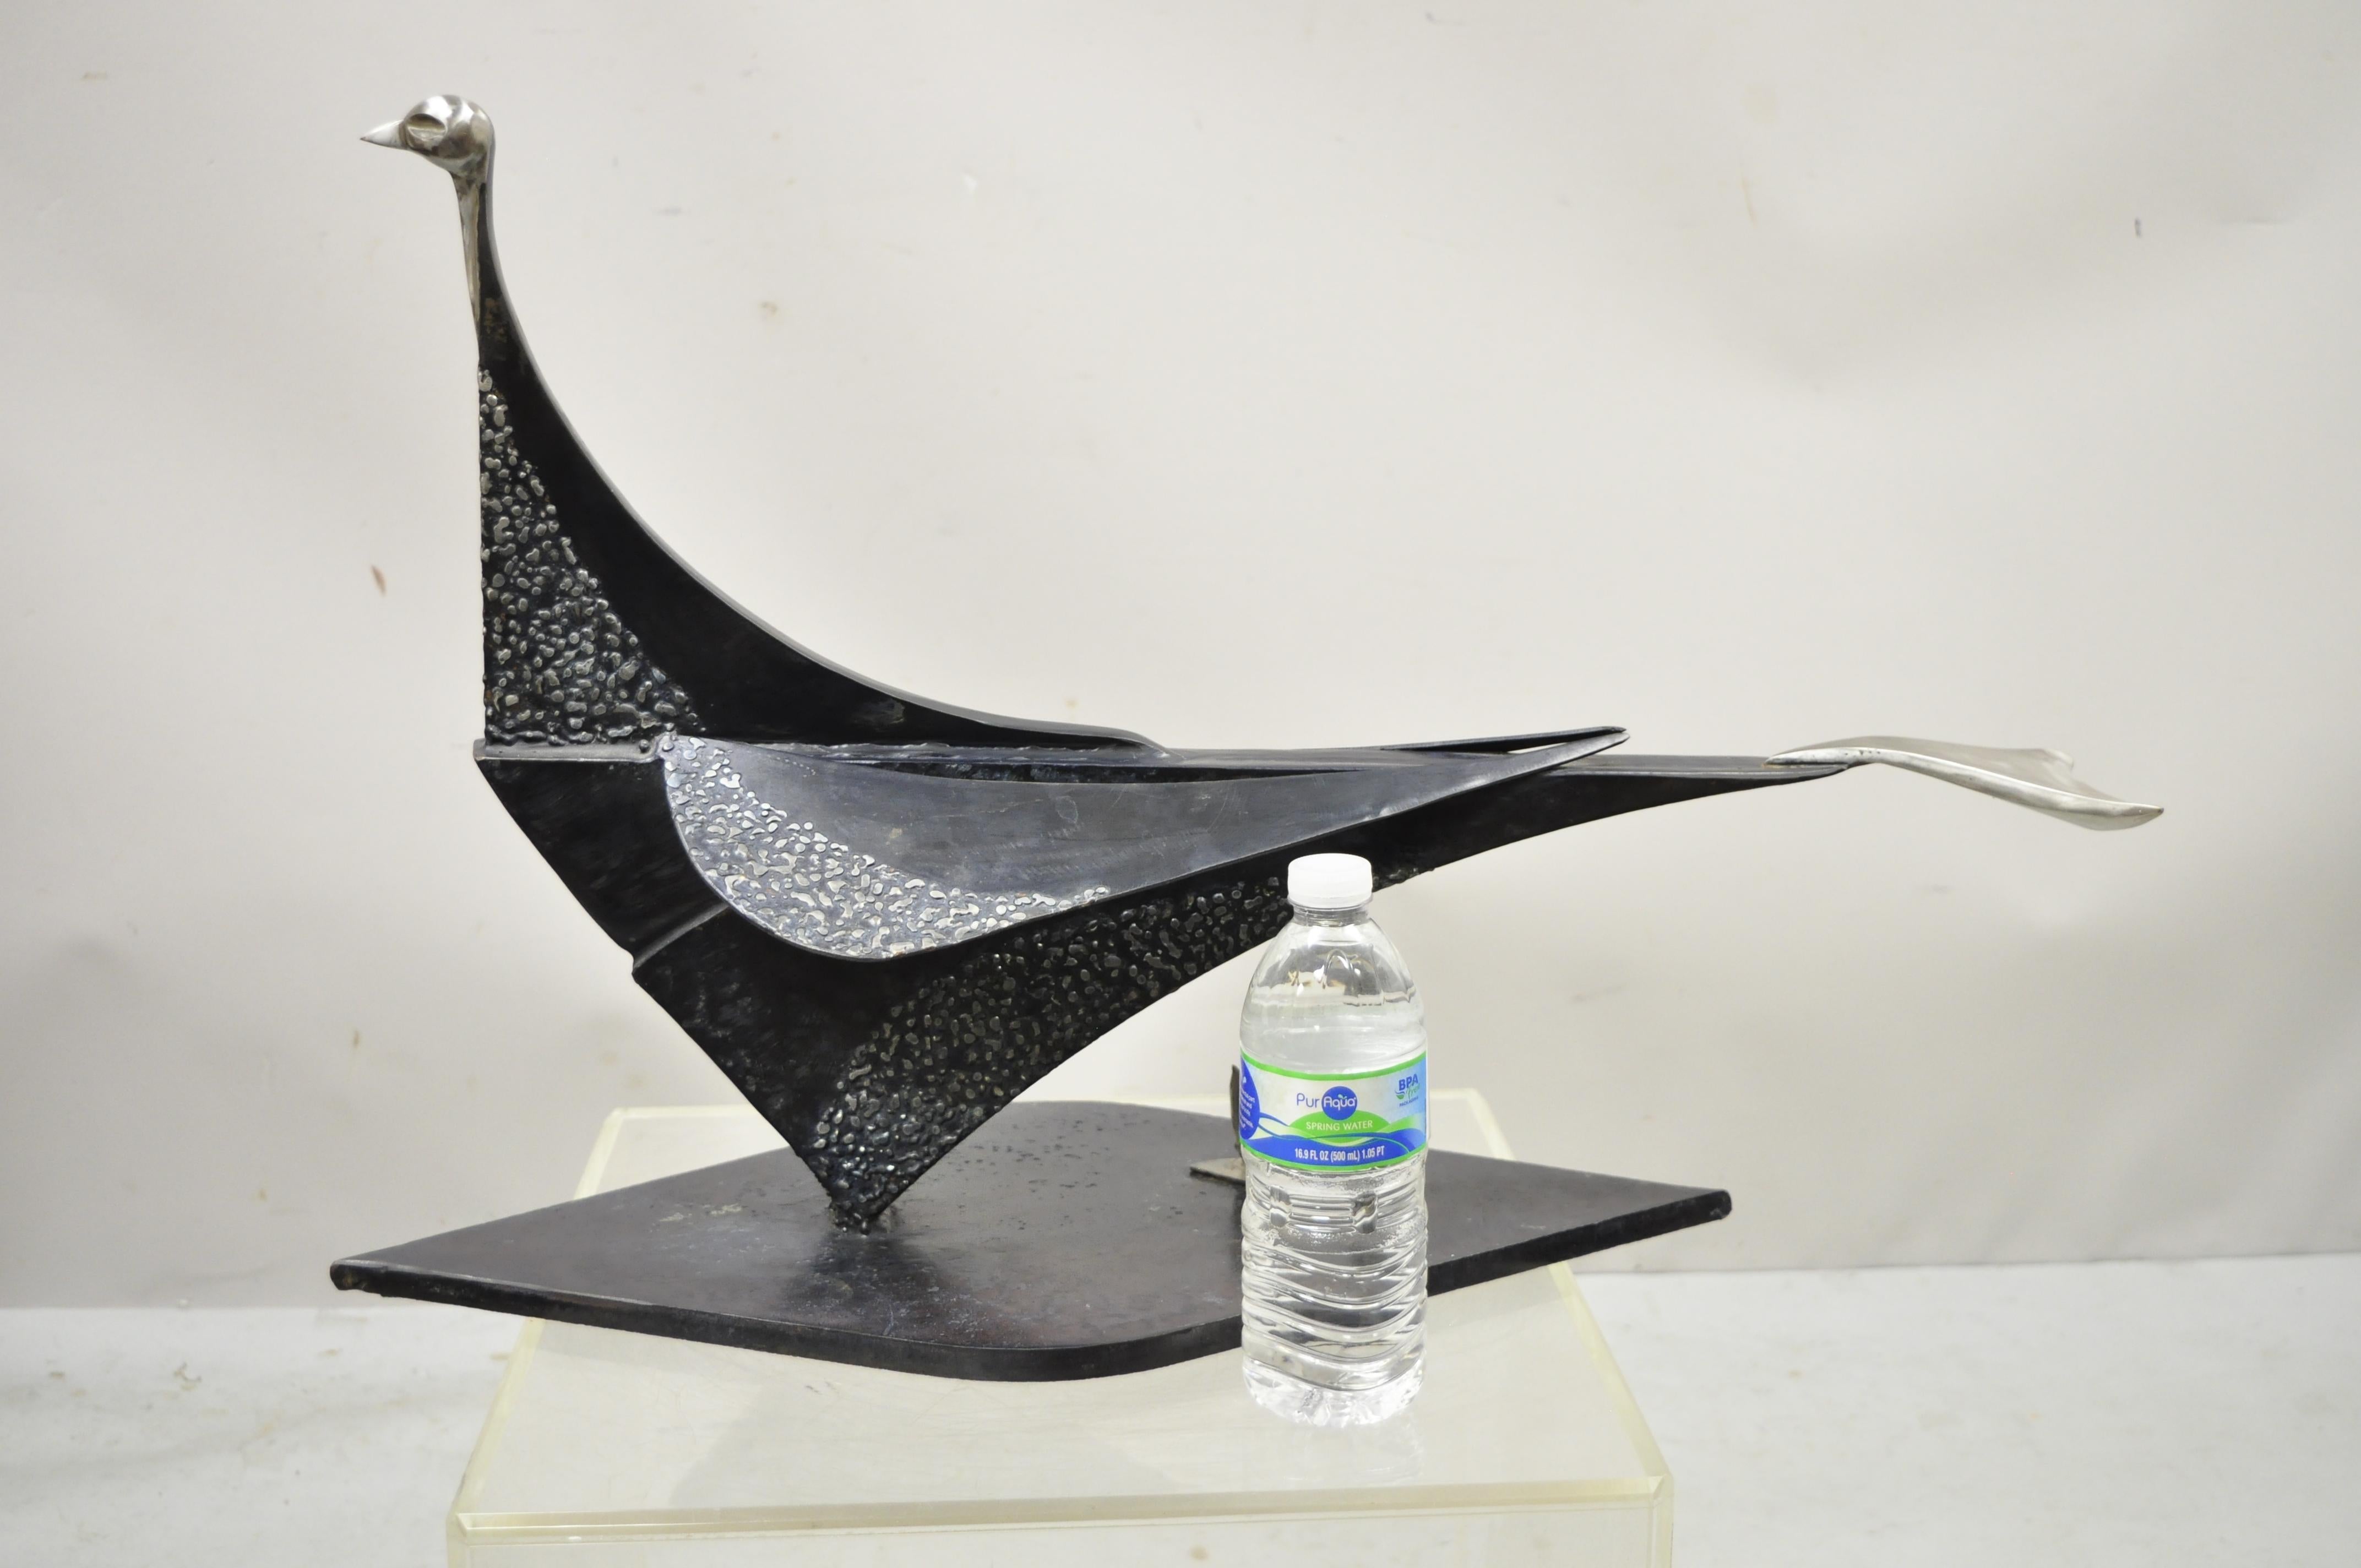 Modern steel metal Brutalist large 28 inch bird sculpture Artist metalwork. Item features stunning metalwork and quality, approximately 50 lbs. Unsigned and artist unknown. Circa late 20th century. Measurements: 18